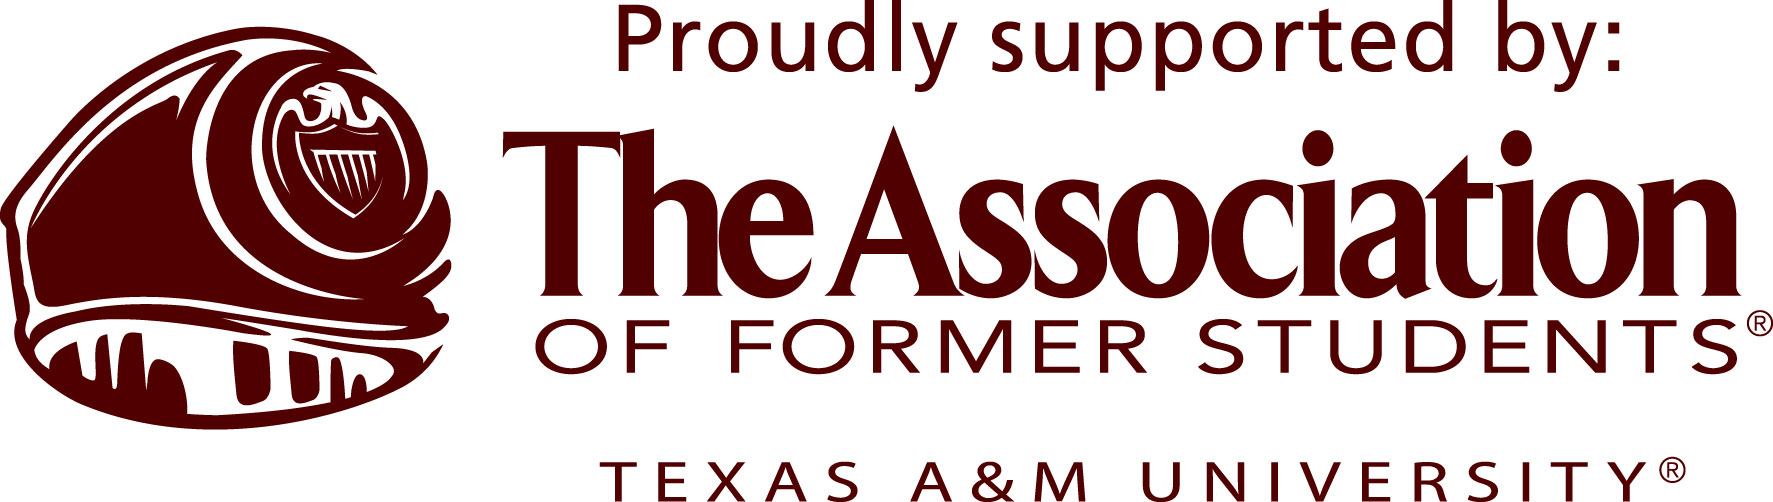 Logo: Proudly Supported by The Association of Former Students